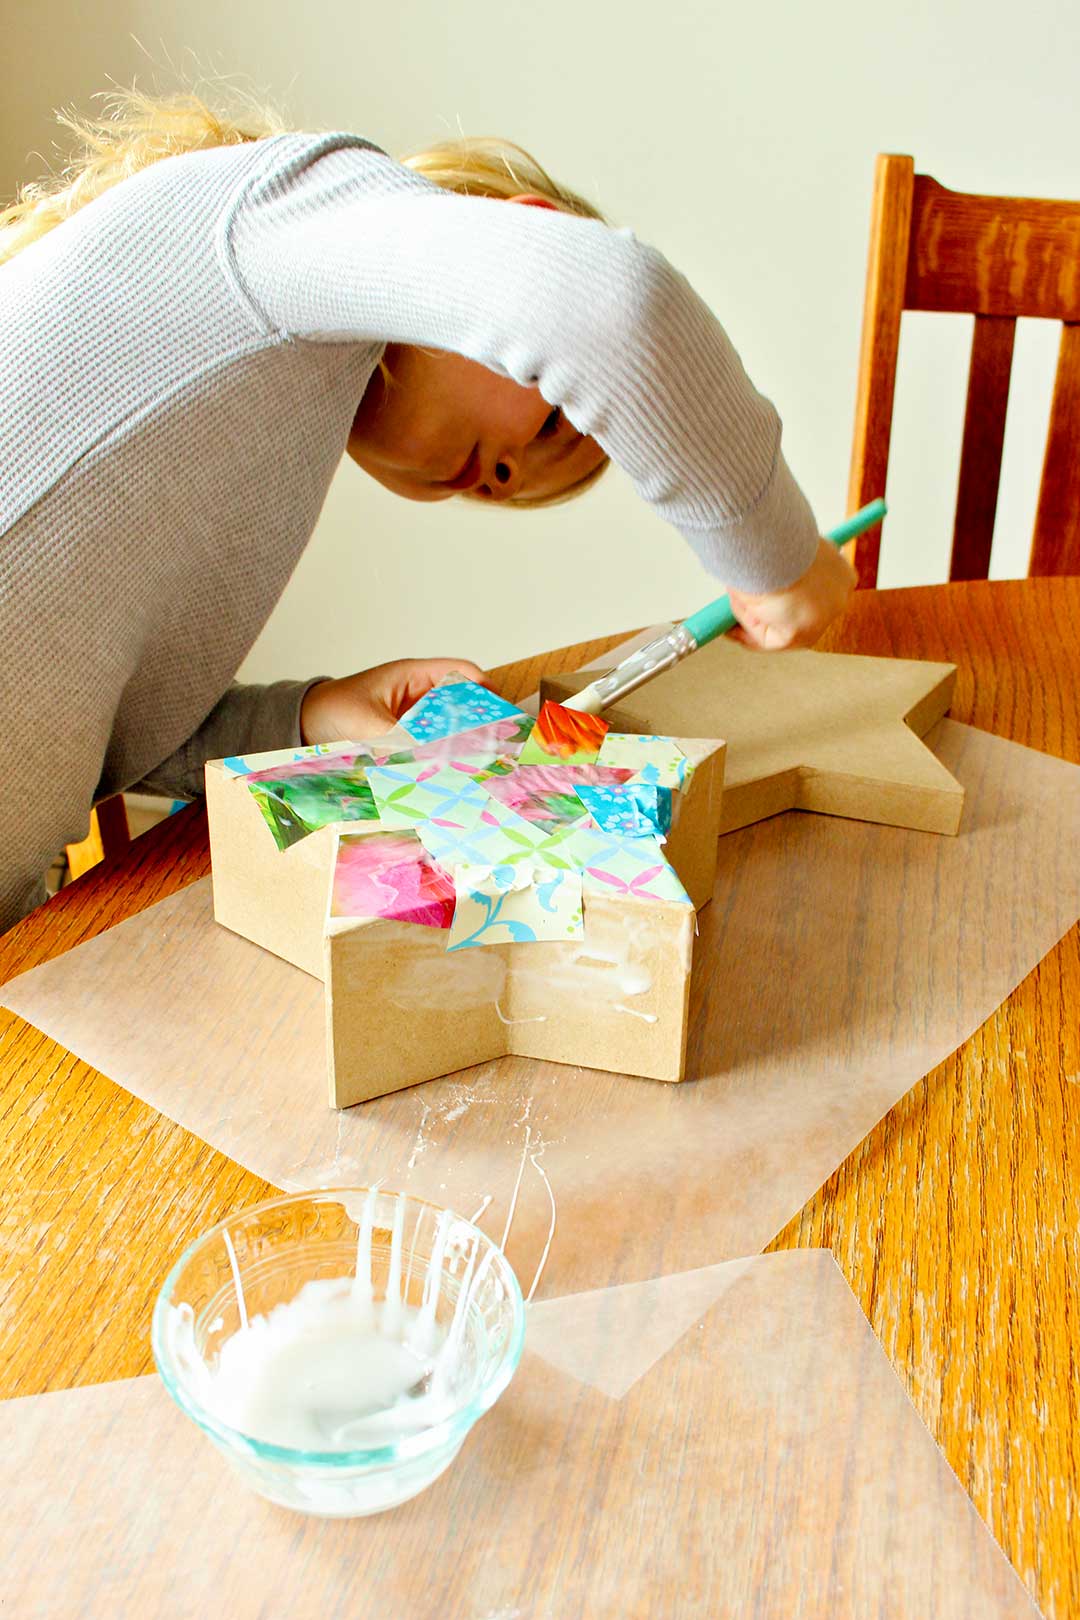 Girl in grey shirt paints decoupage onto a star shaped box at the kitchen table.